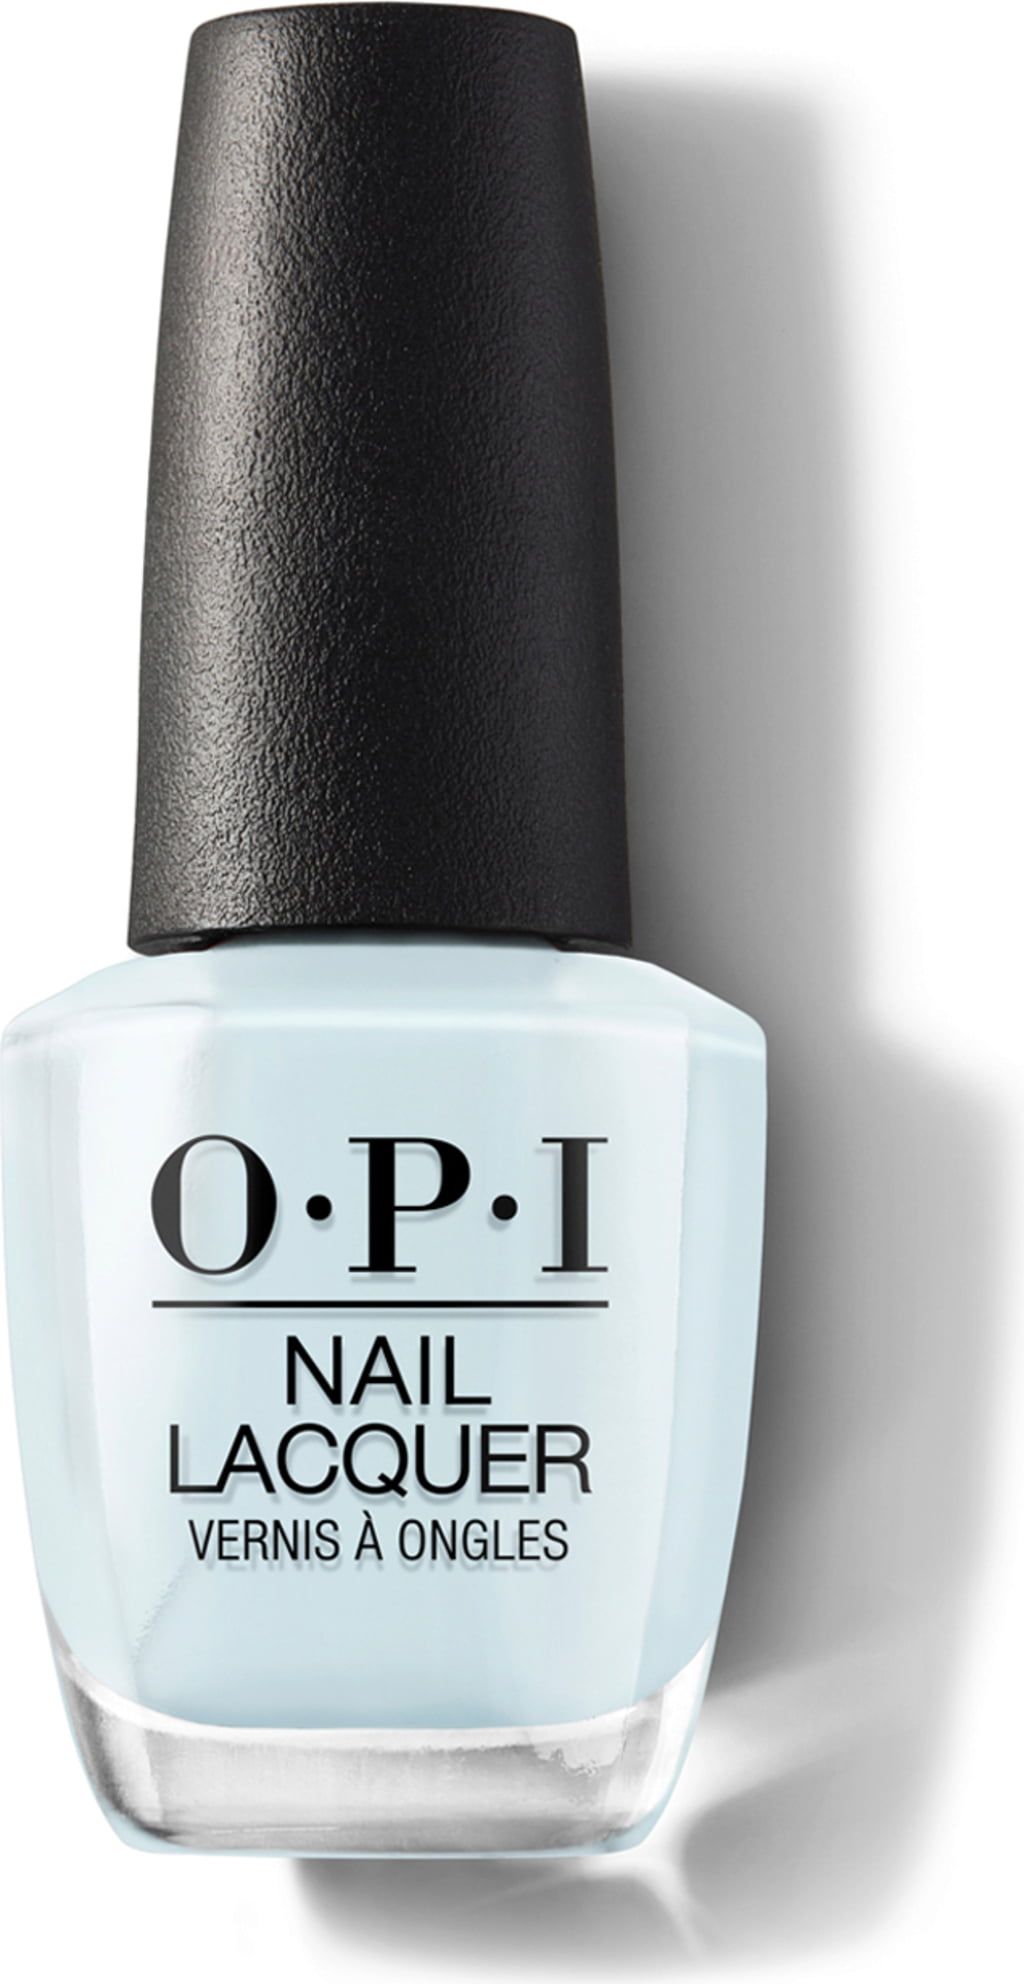 OPI Infinite Shine 2 Long-Wear Lacquer in Coconuts Over OPI Review | Allure